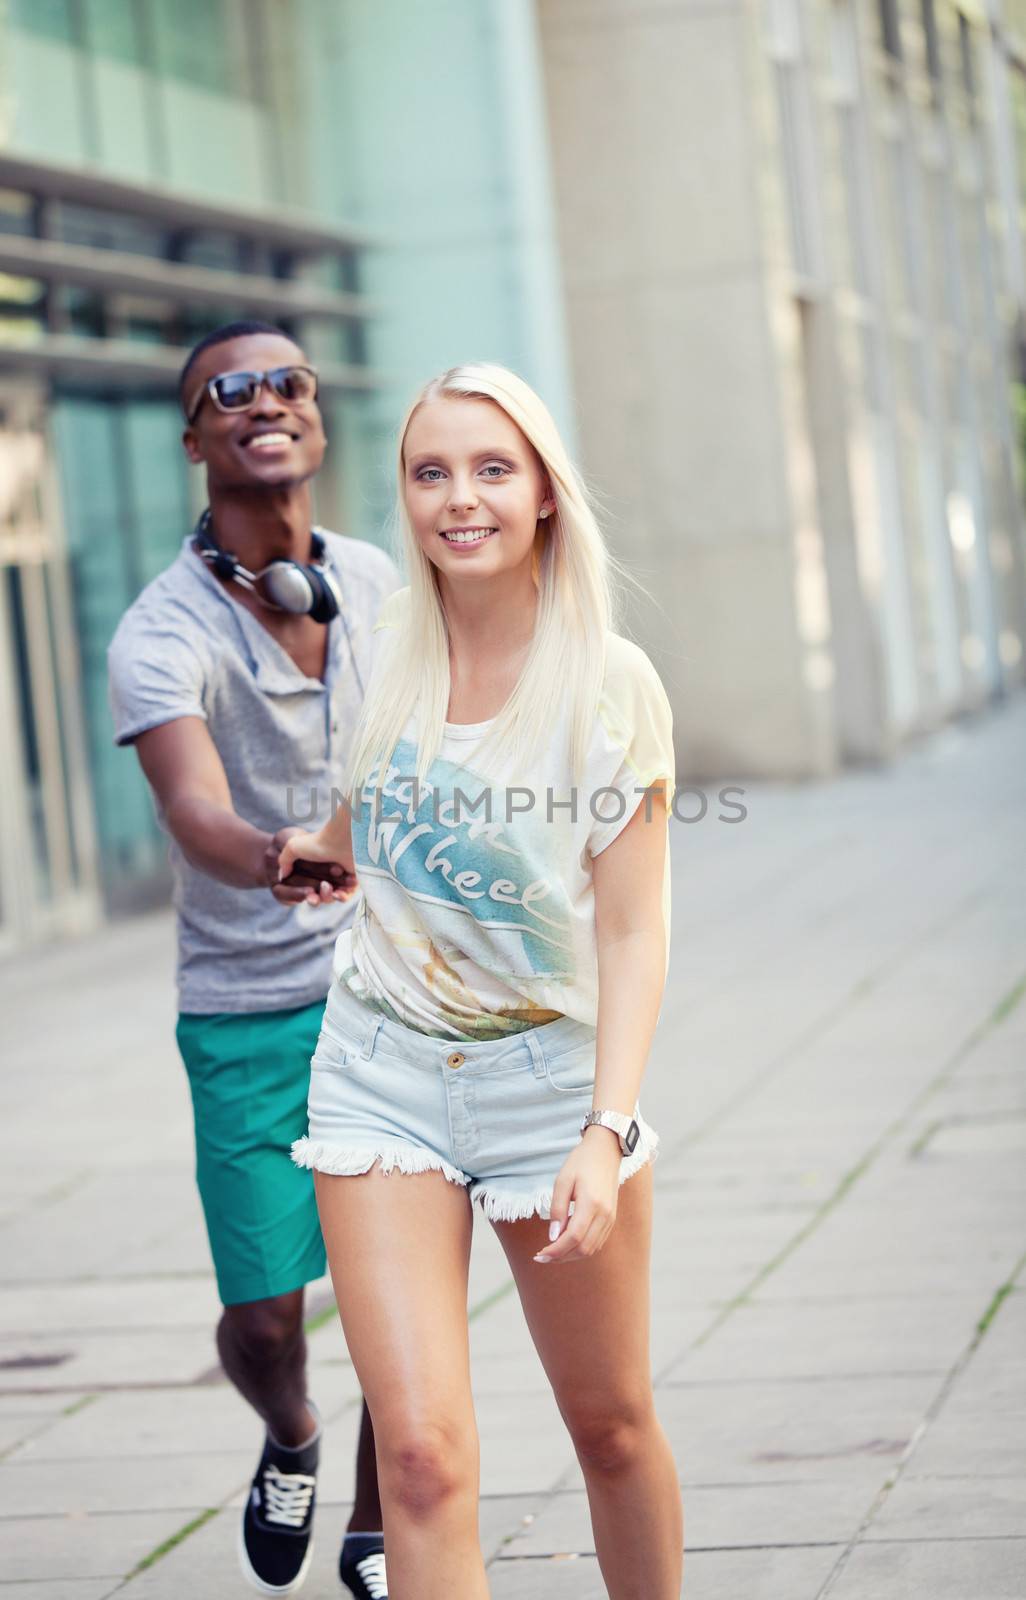 happy young couple have fun in the city summertime outdoor smiling lifestyle